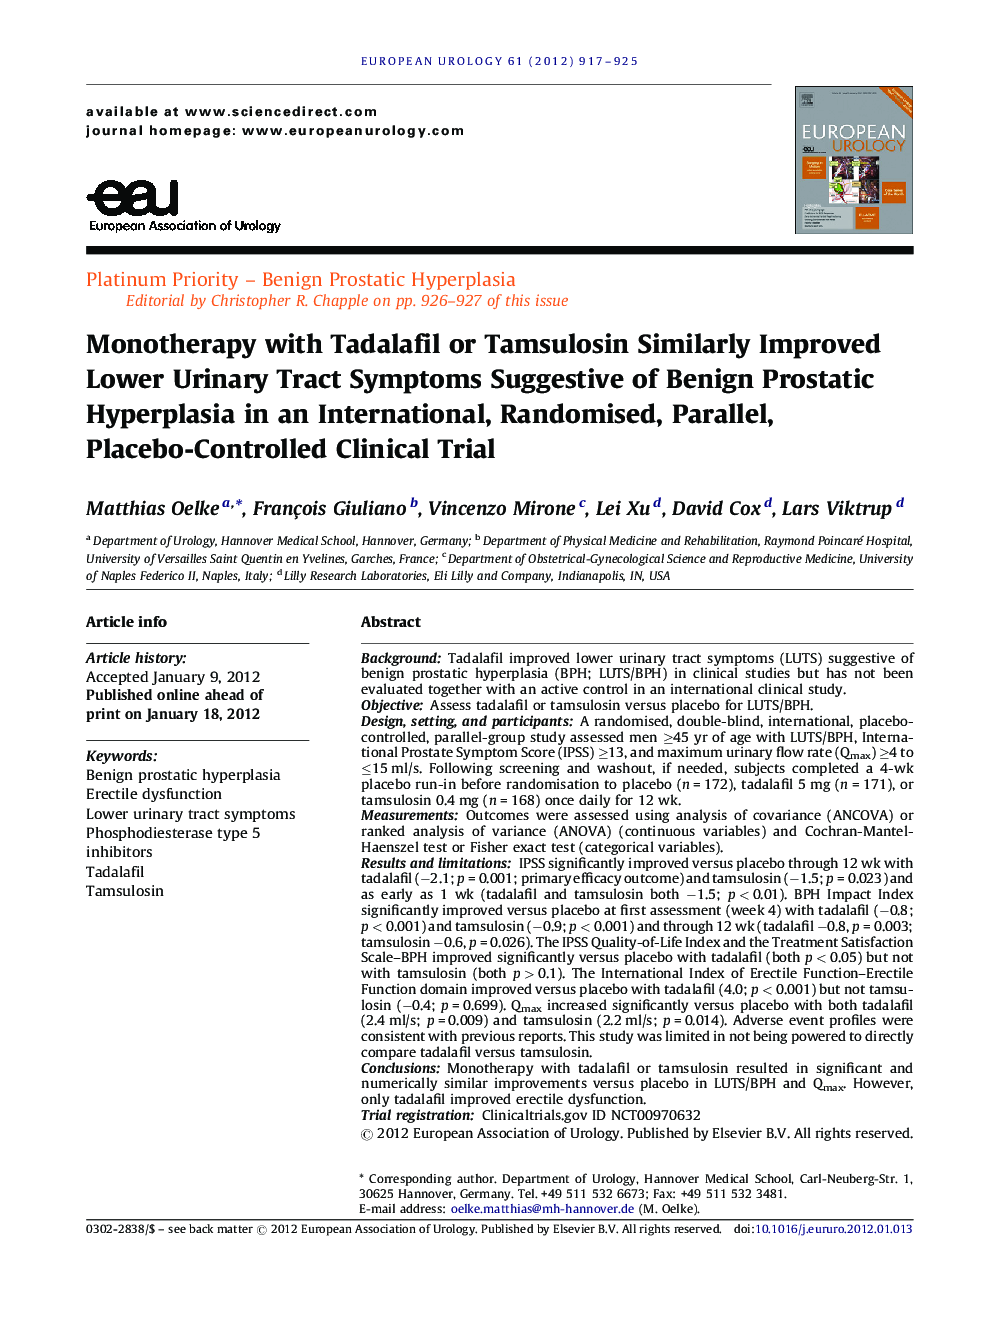 Monotherapy with Tadalafil or Tamsulosin Similarly Improved Lower Urinary Tract Symptoms Suggestive of Benign Prostatic Hyperplasia in an International, Randomised, Parallel, Placebo-Controlled Clinical Trial